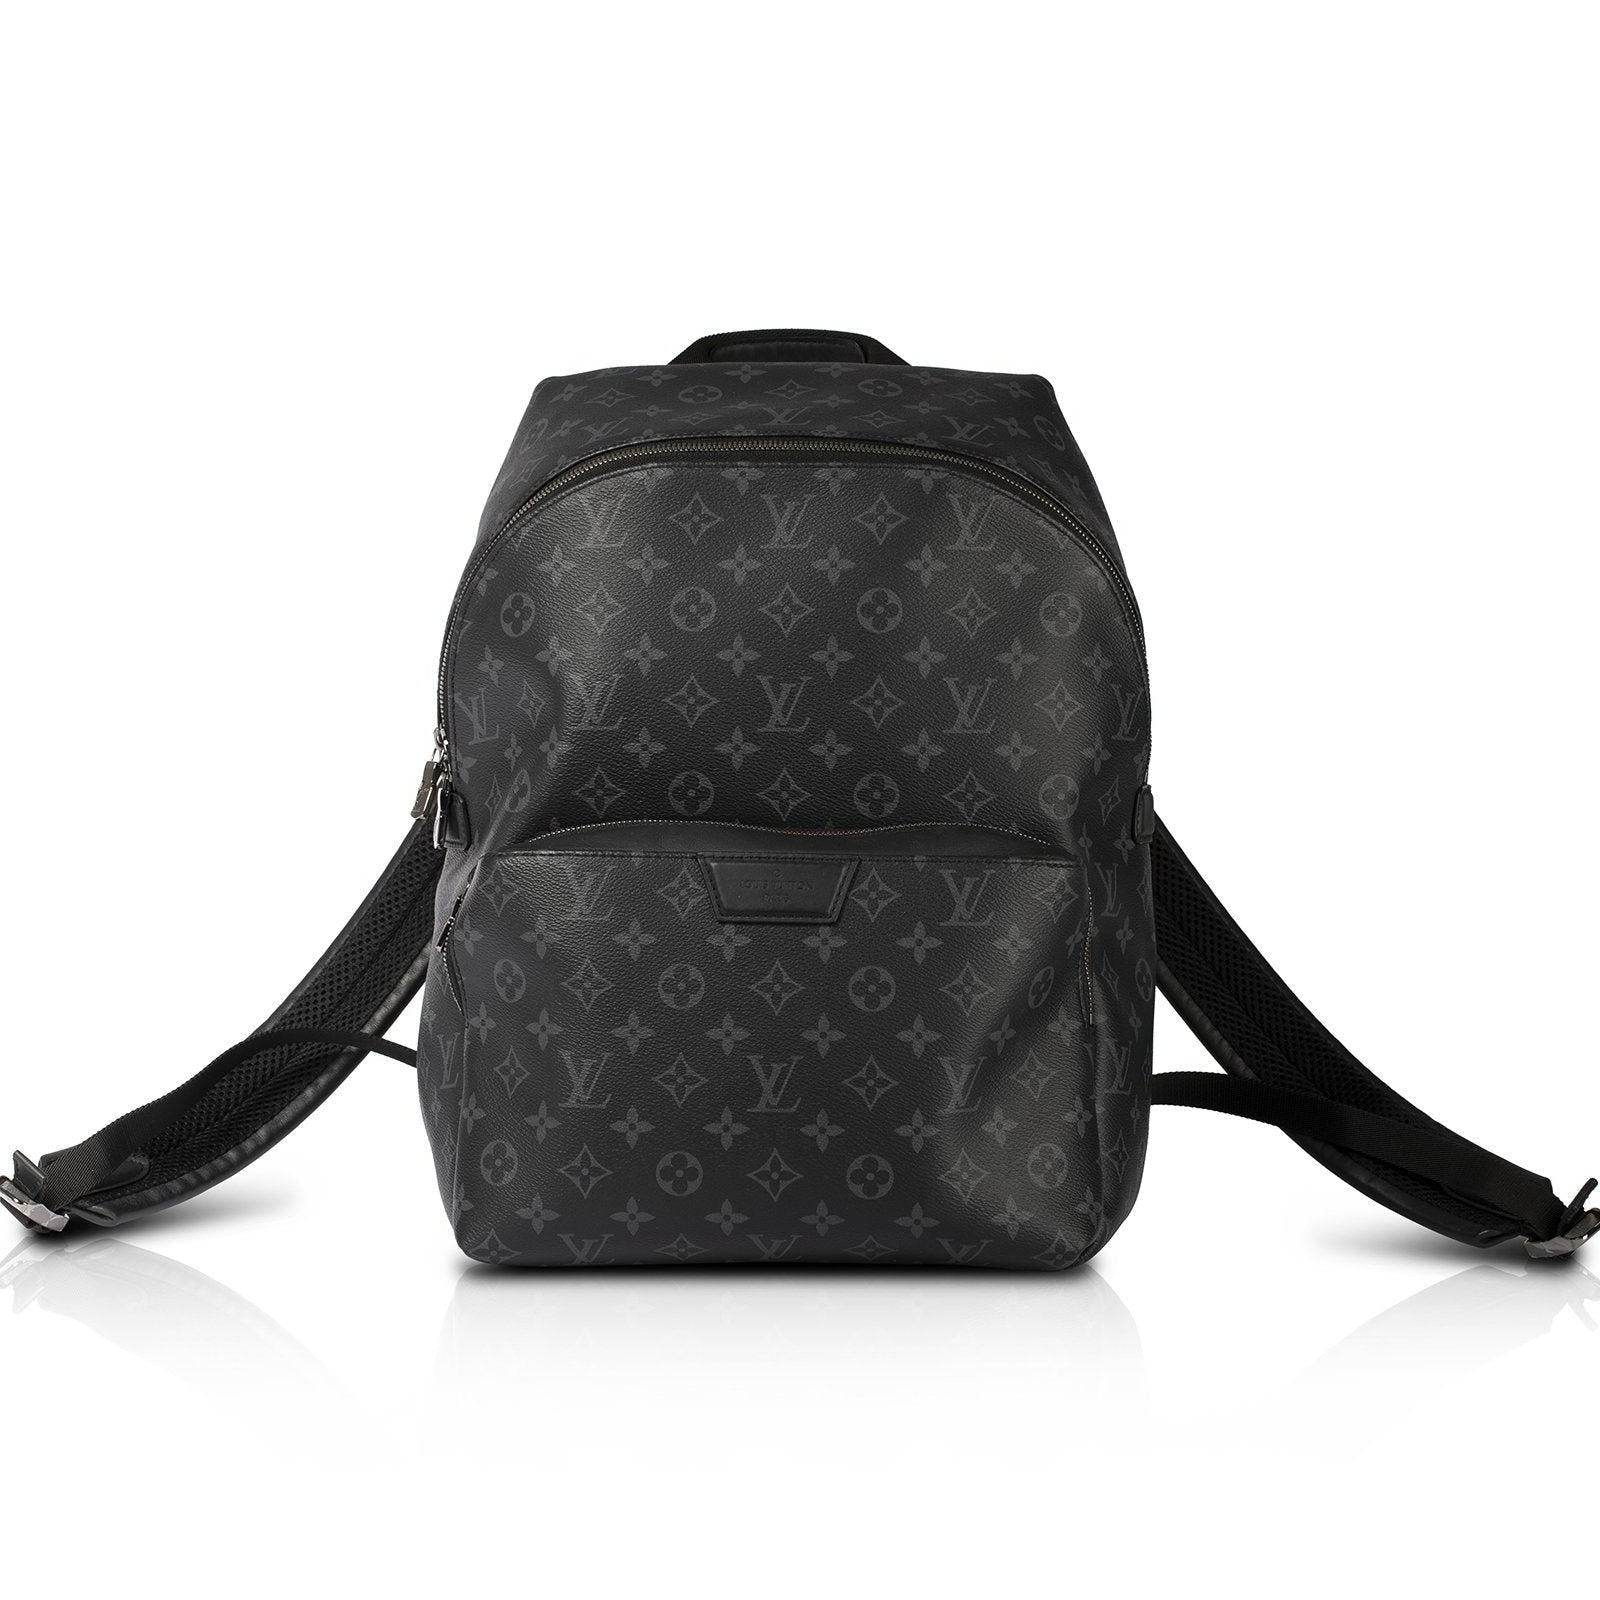 Shop Now: Louis Vuitton 2018 Monogram Eclipse Discovery Backpack